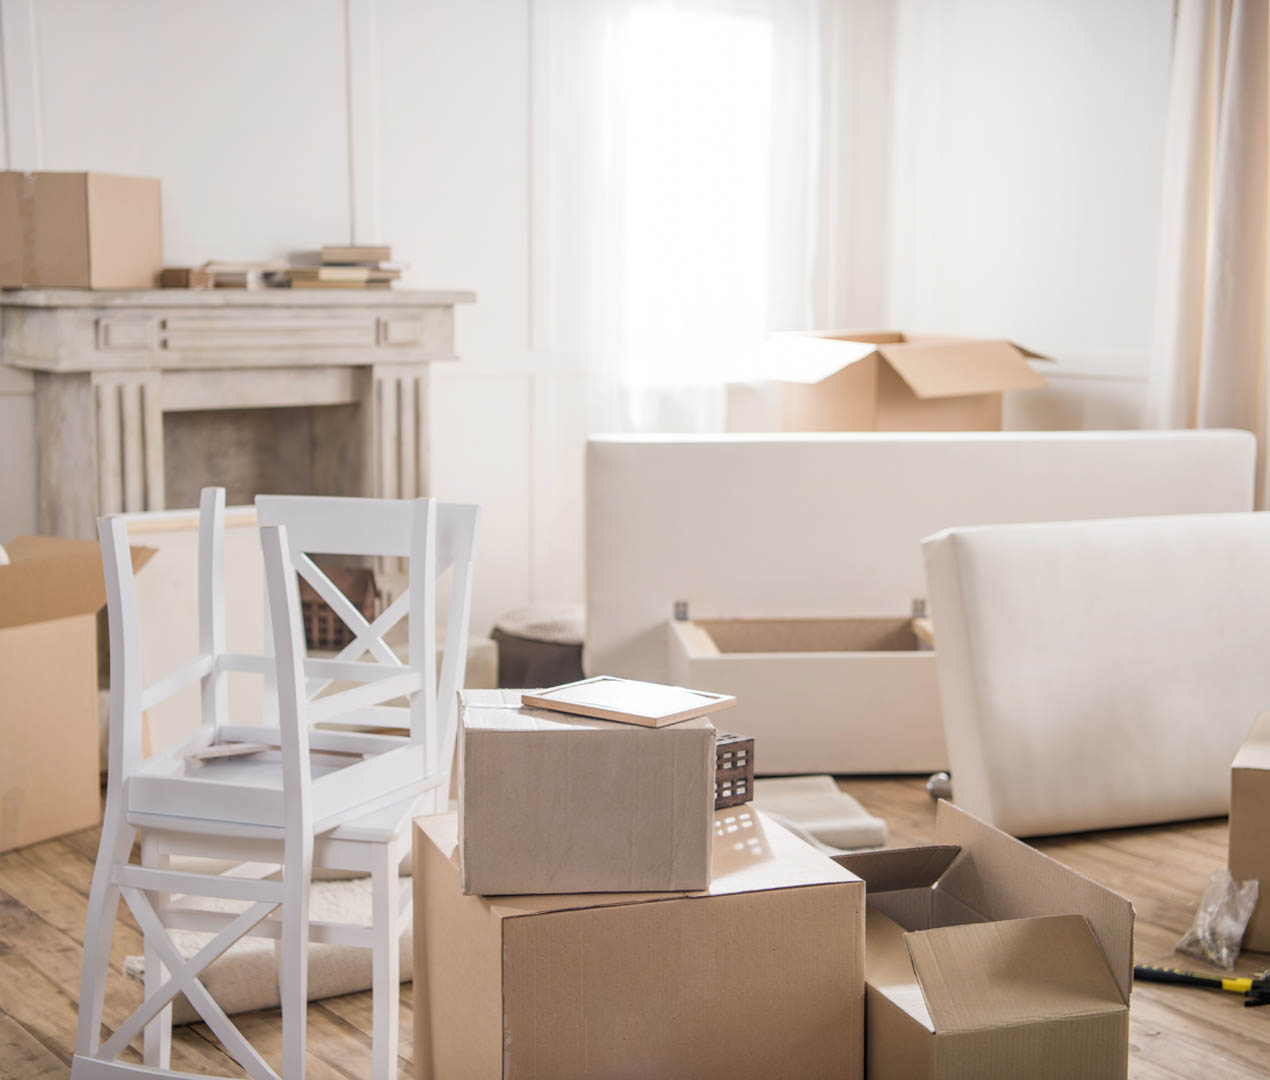 7 Tips to Stay Organized For Your Move Boxes Image